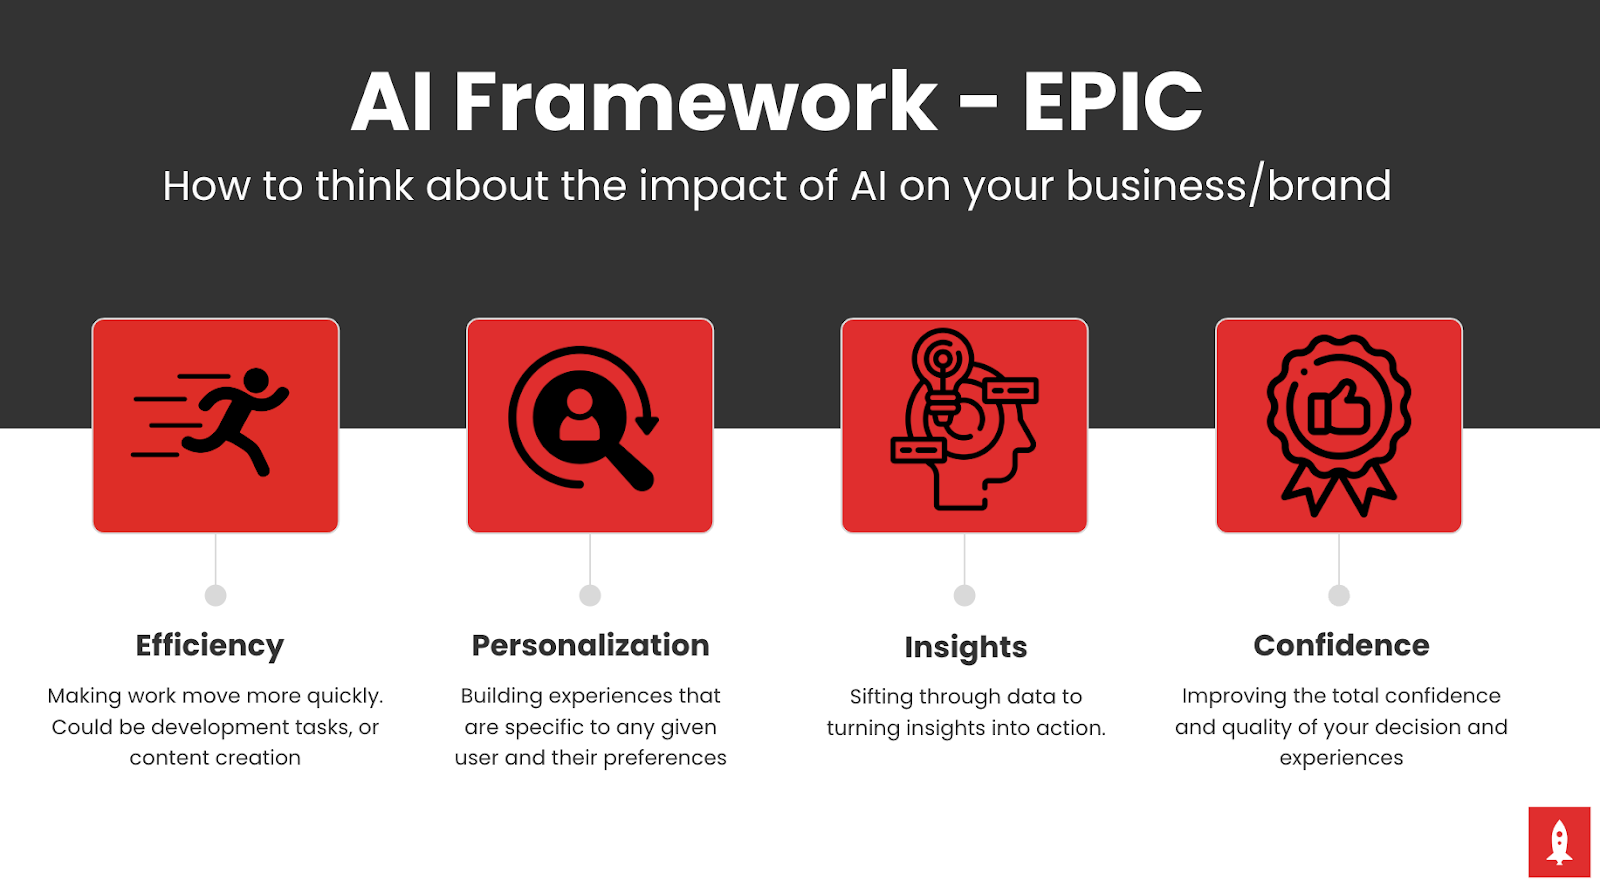 Graphic of AI framework: EPIC (Efficiency; Personalization; Insights; Confidence) (Source: Airtank)